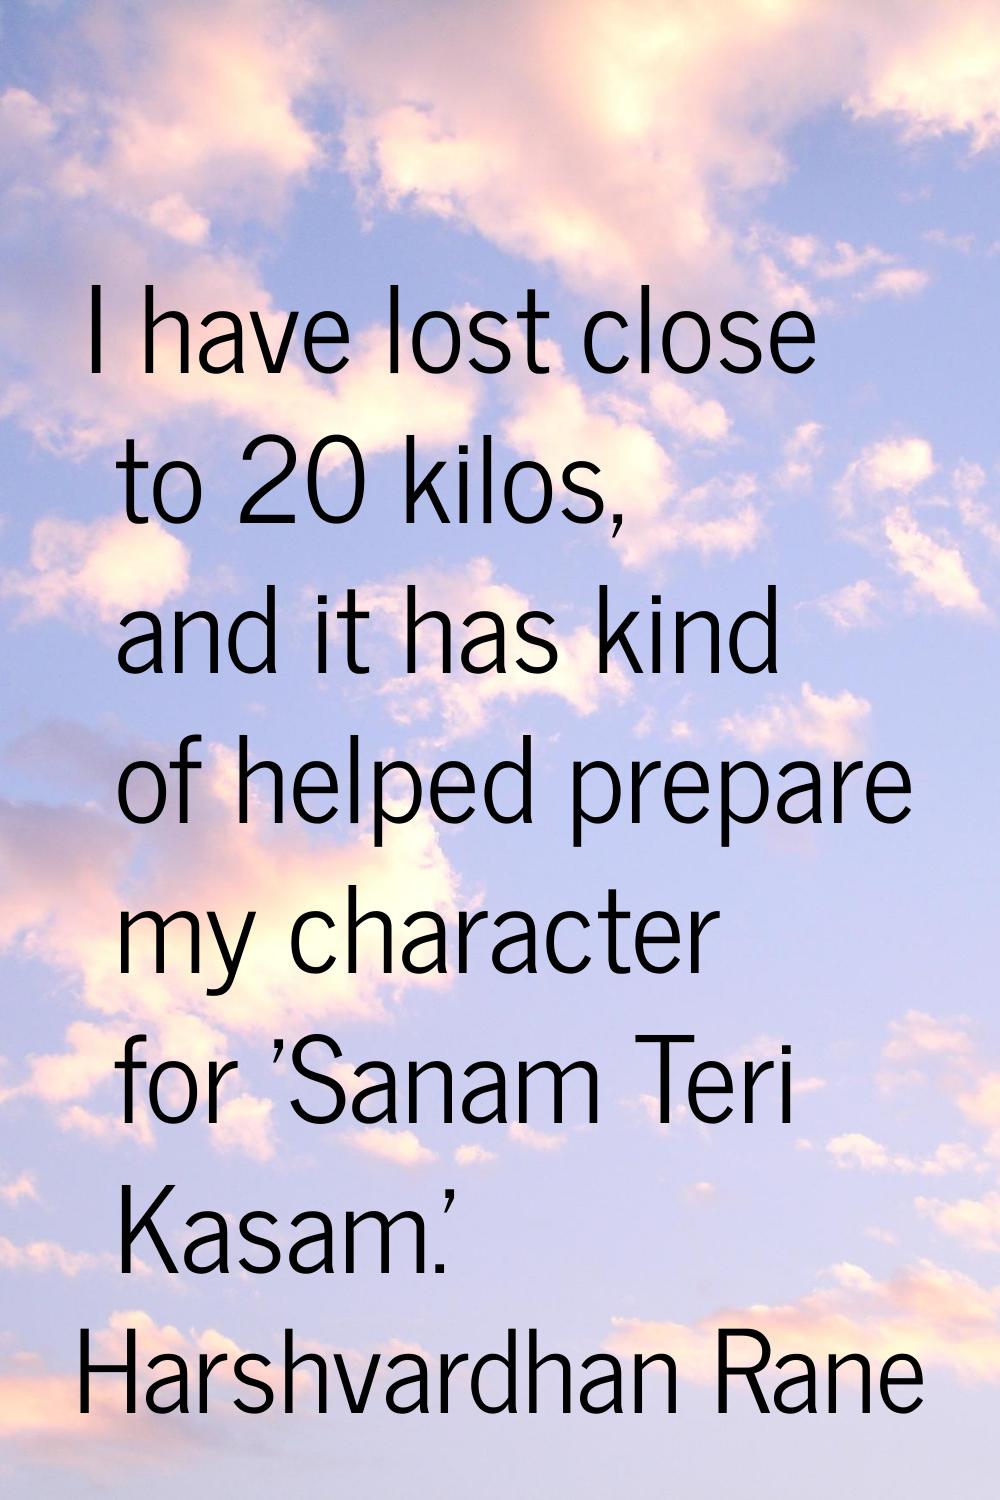 I have lost close to 20 kilos, and it has kind of helped prepare my character for 'Sanam Teri Kasam